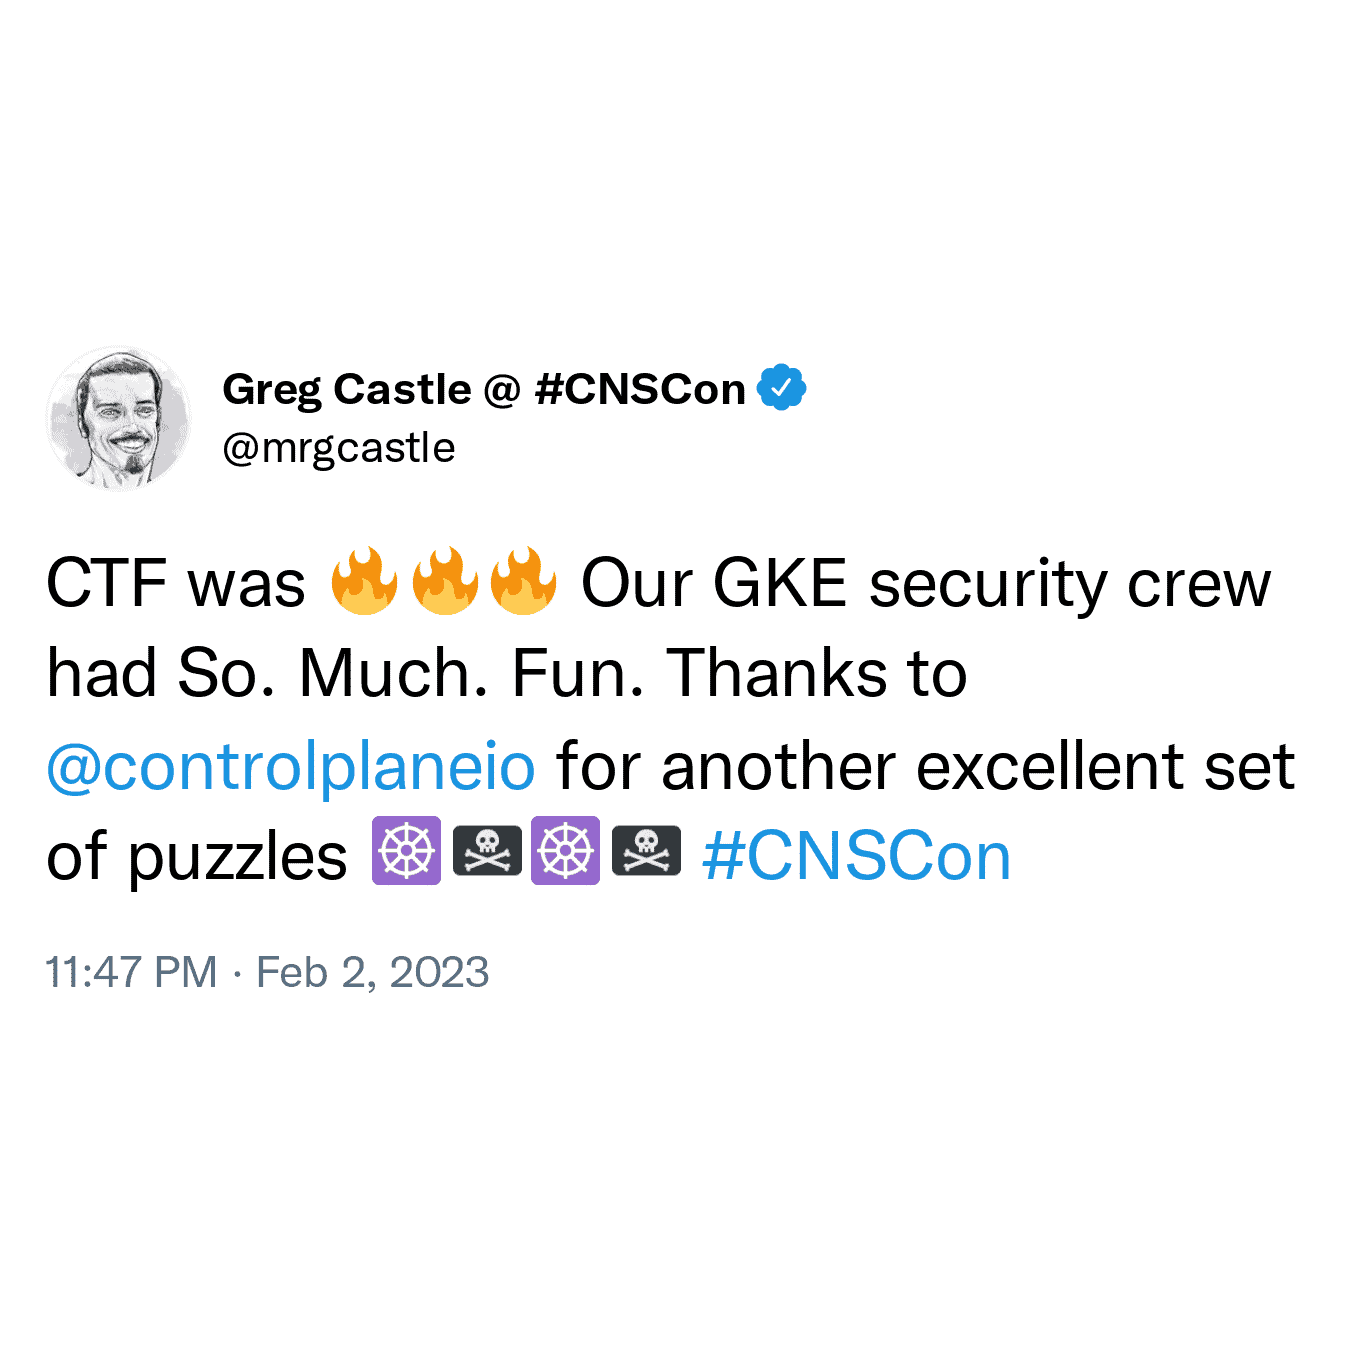 Greg Castle tweets, "CTF was (fire). Our GKE security crew had so. much. fun. Thanks to @controlplaneio for another excellent set of puzzles #CNSCon